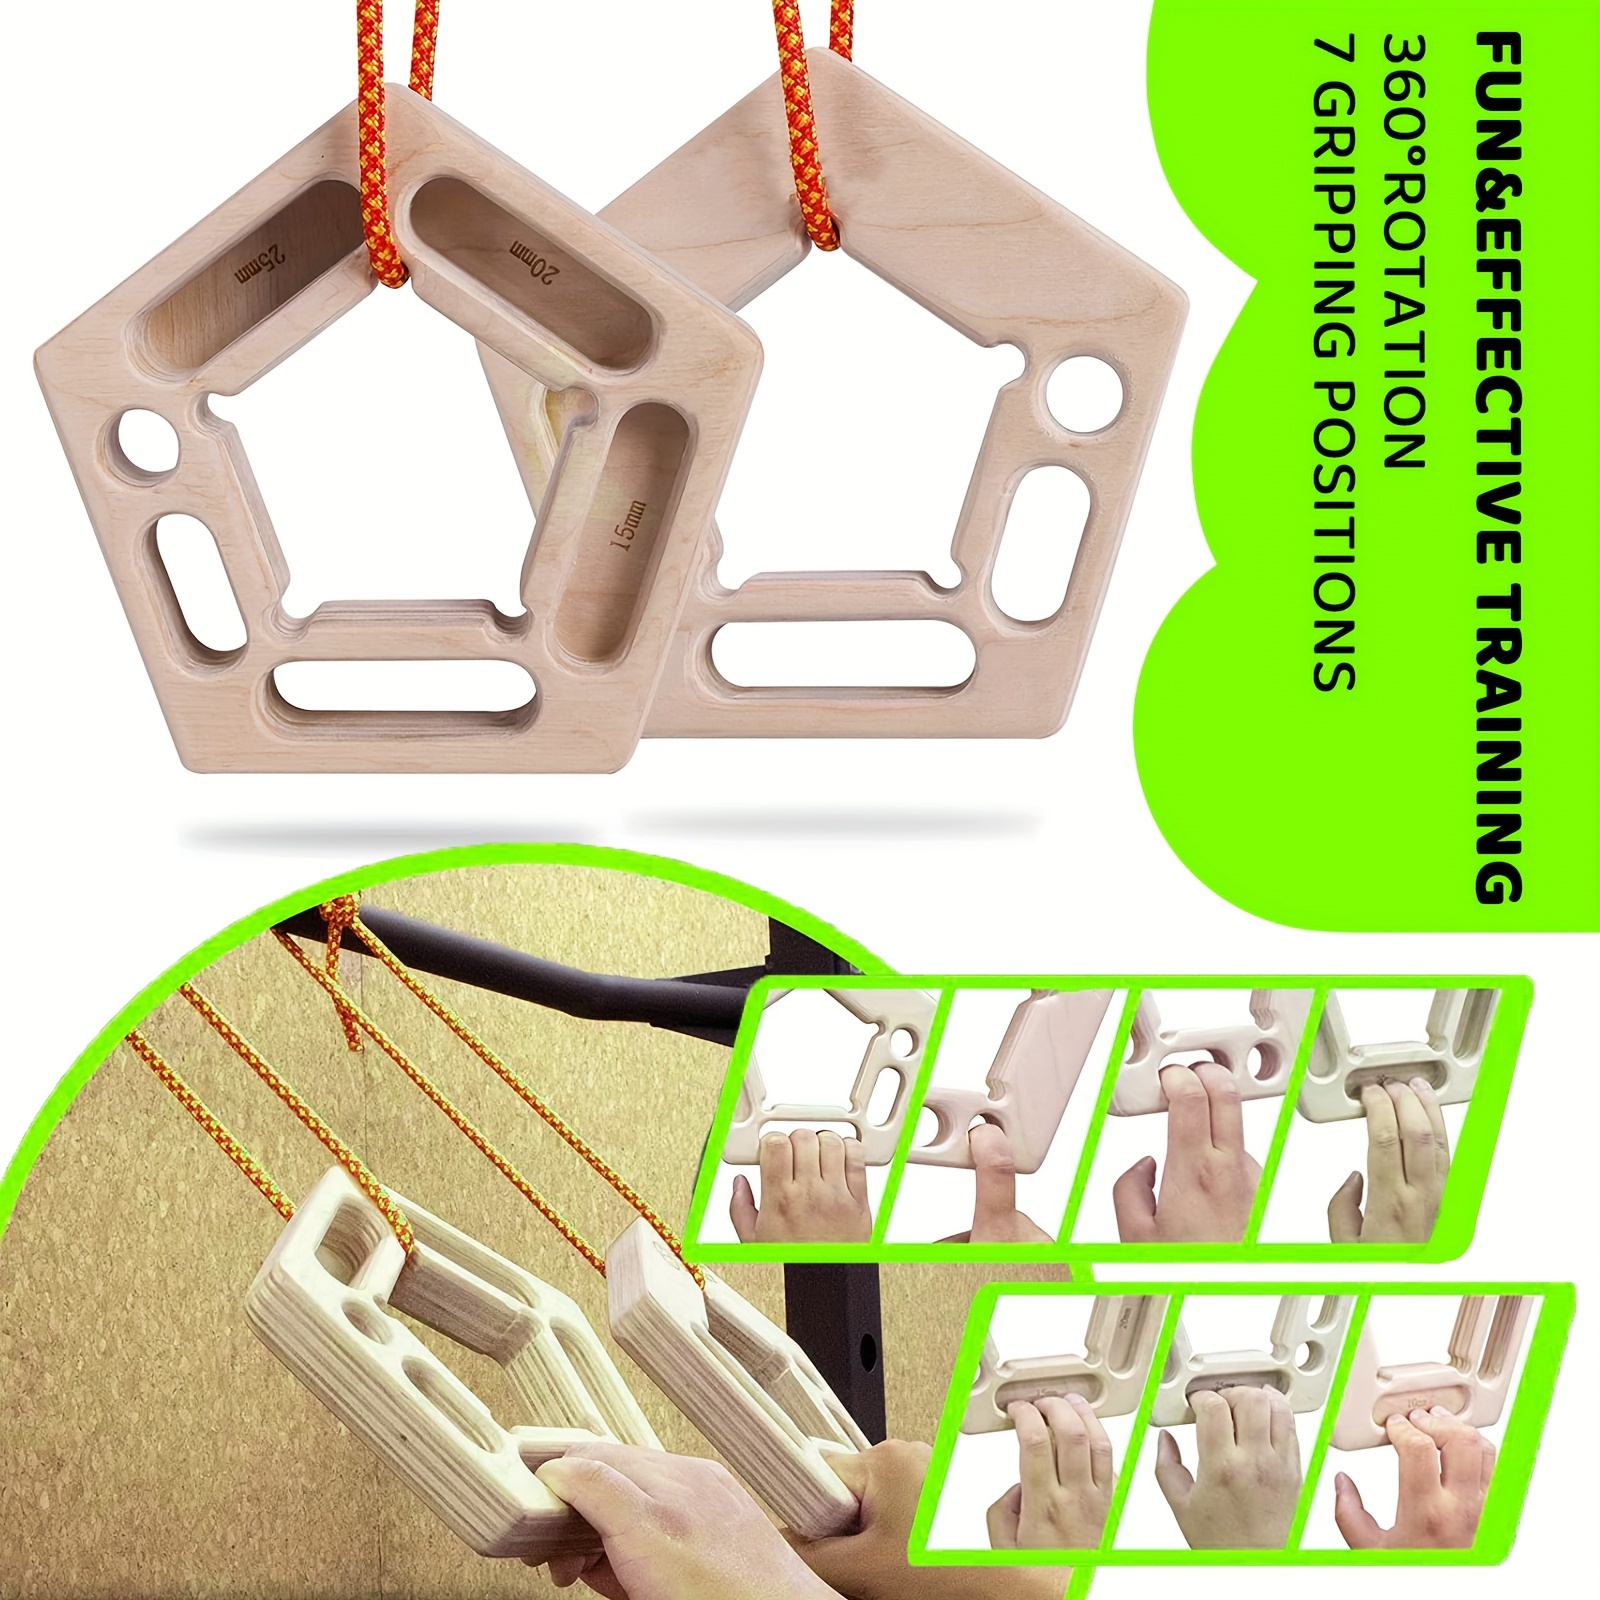 Portable Double-Sided Climbing Fingerboard for Grip UK